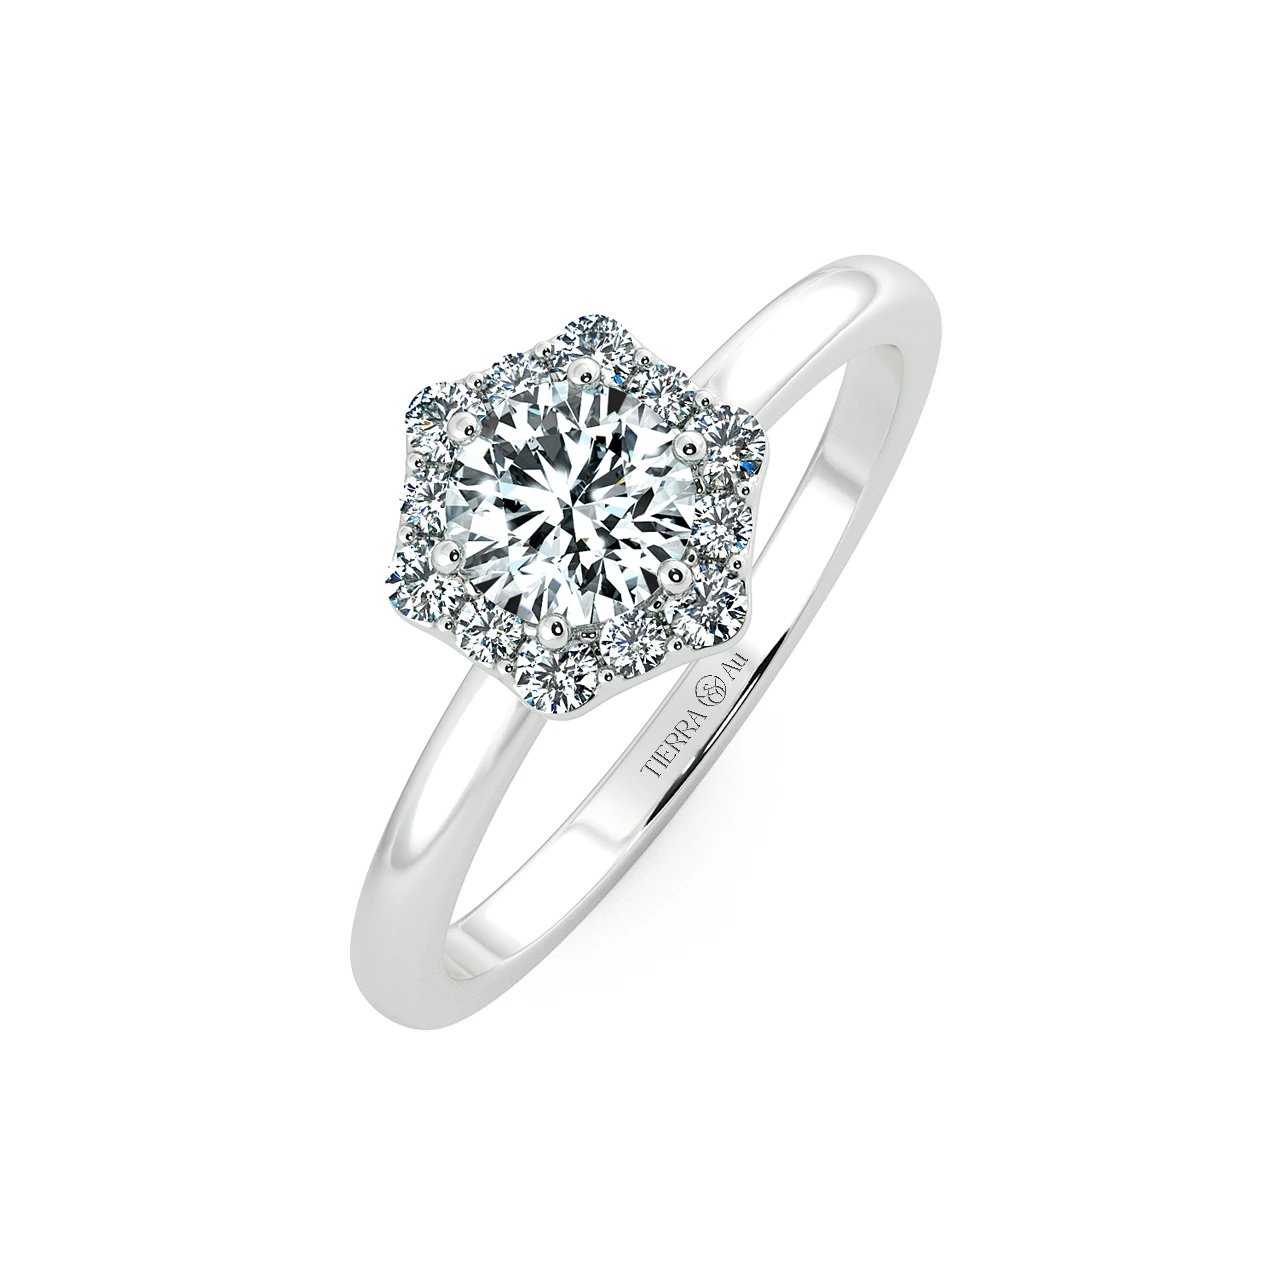 Single Classic Octagonal Halo Engagement Ring NCH2104 3